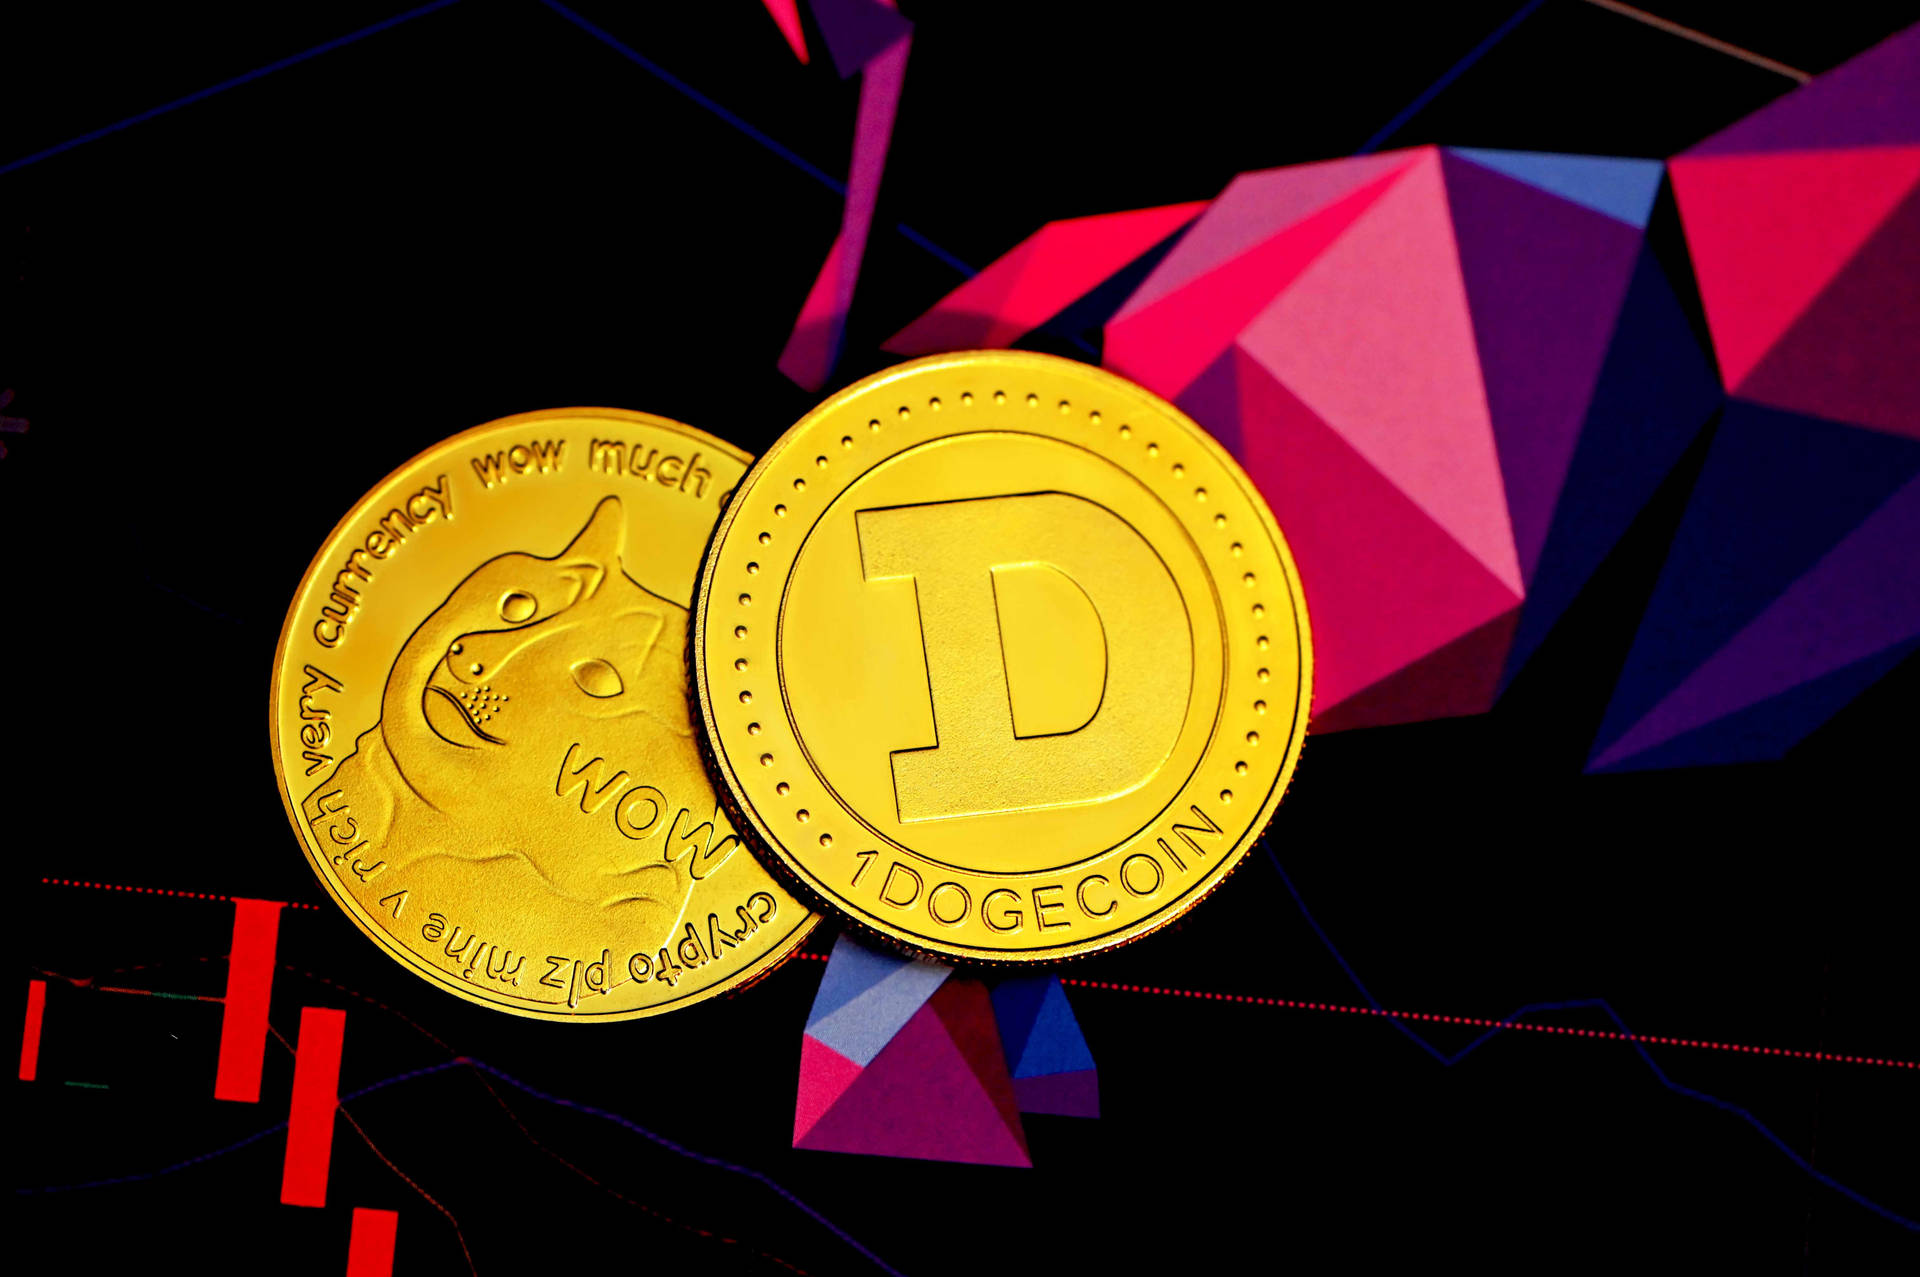 Dogecoin Soaring High - Cryptocurrency Evolution Background